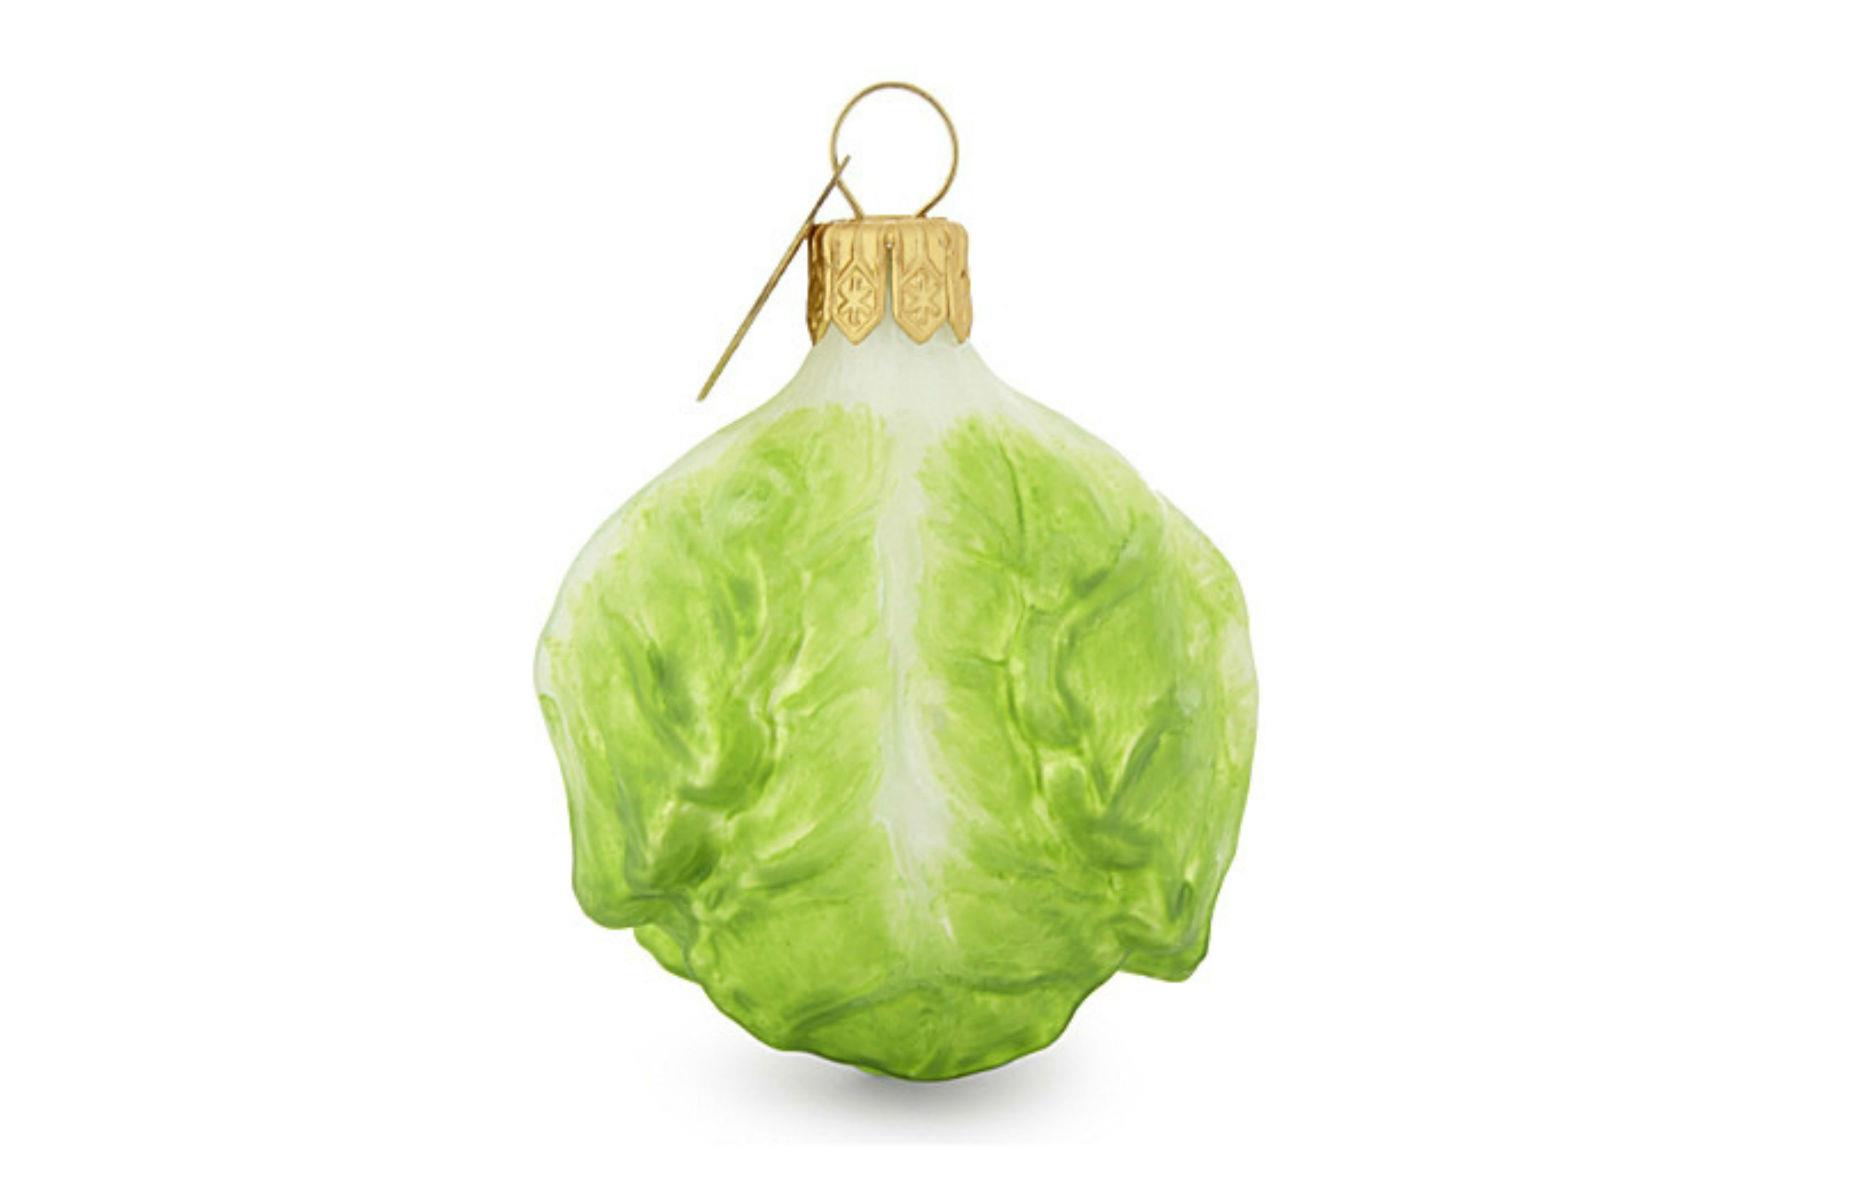 Sprout bauble: $46 (£35)